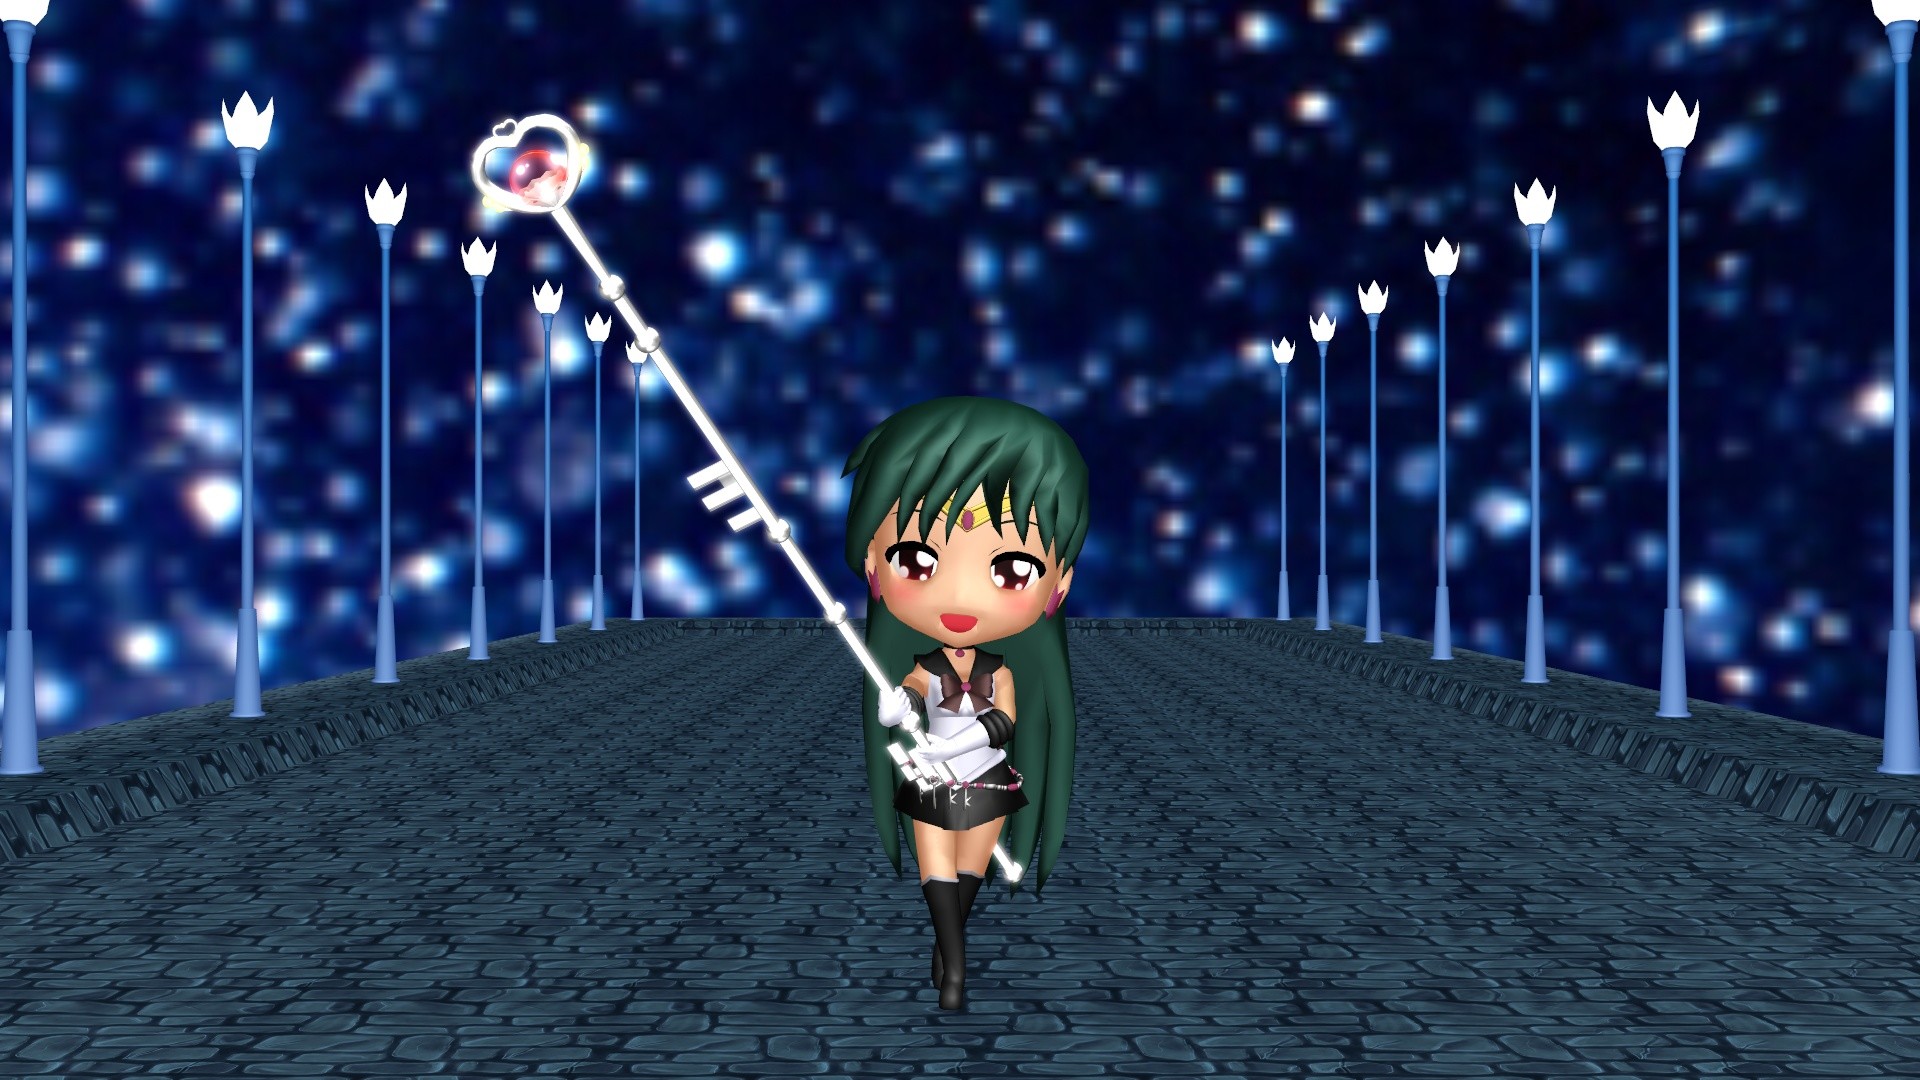 1920x1080 ... Sailor Pluto In The Space by liloupeach